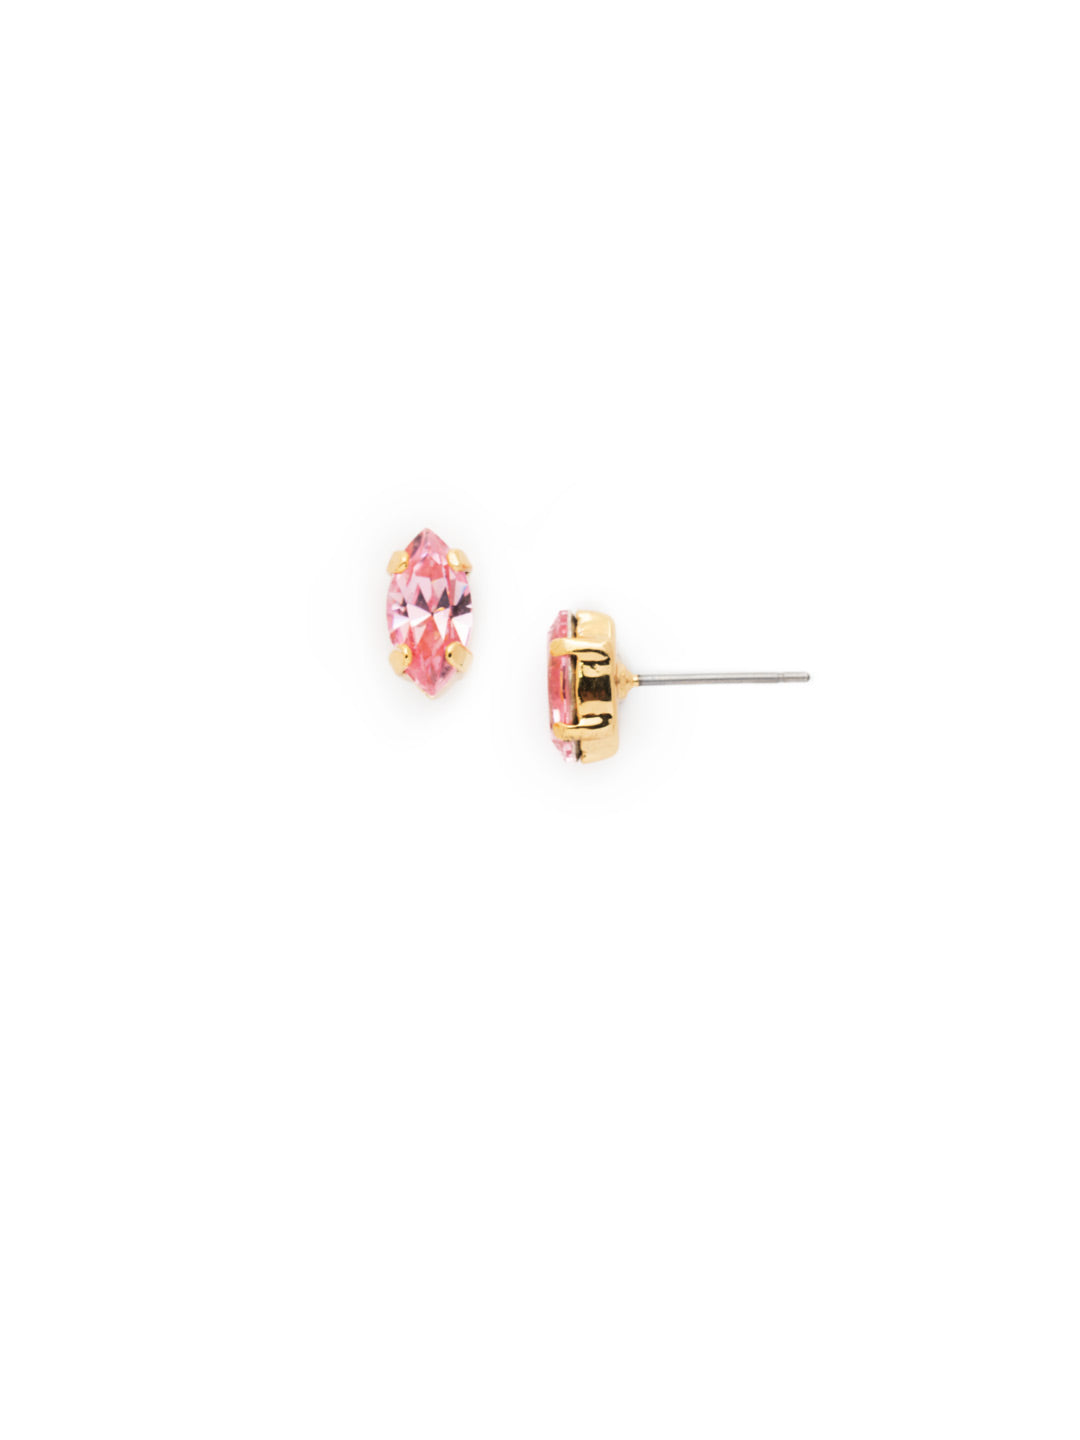 Clarissa Stud Earrings - EEP4BGSPR - <p>The Clarissa Stud Earring is for the lover of classics with a twist. Simple sparkling crystals get an oomph from the navette shape. From Sorrelli's Spring Rain collection in our Bright Gold-tone finish.</p>